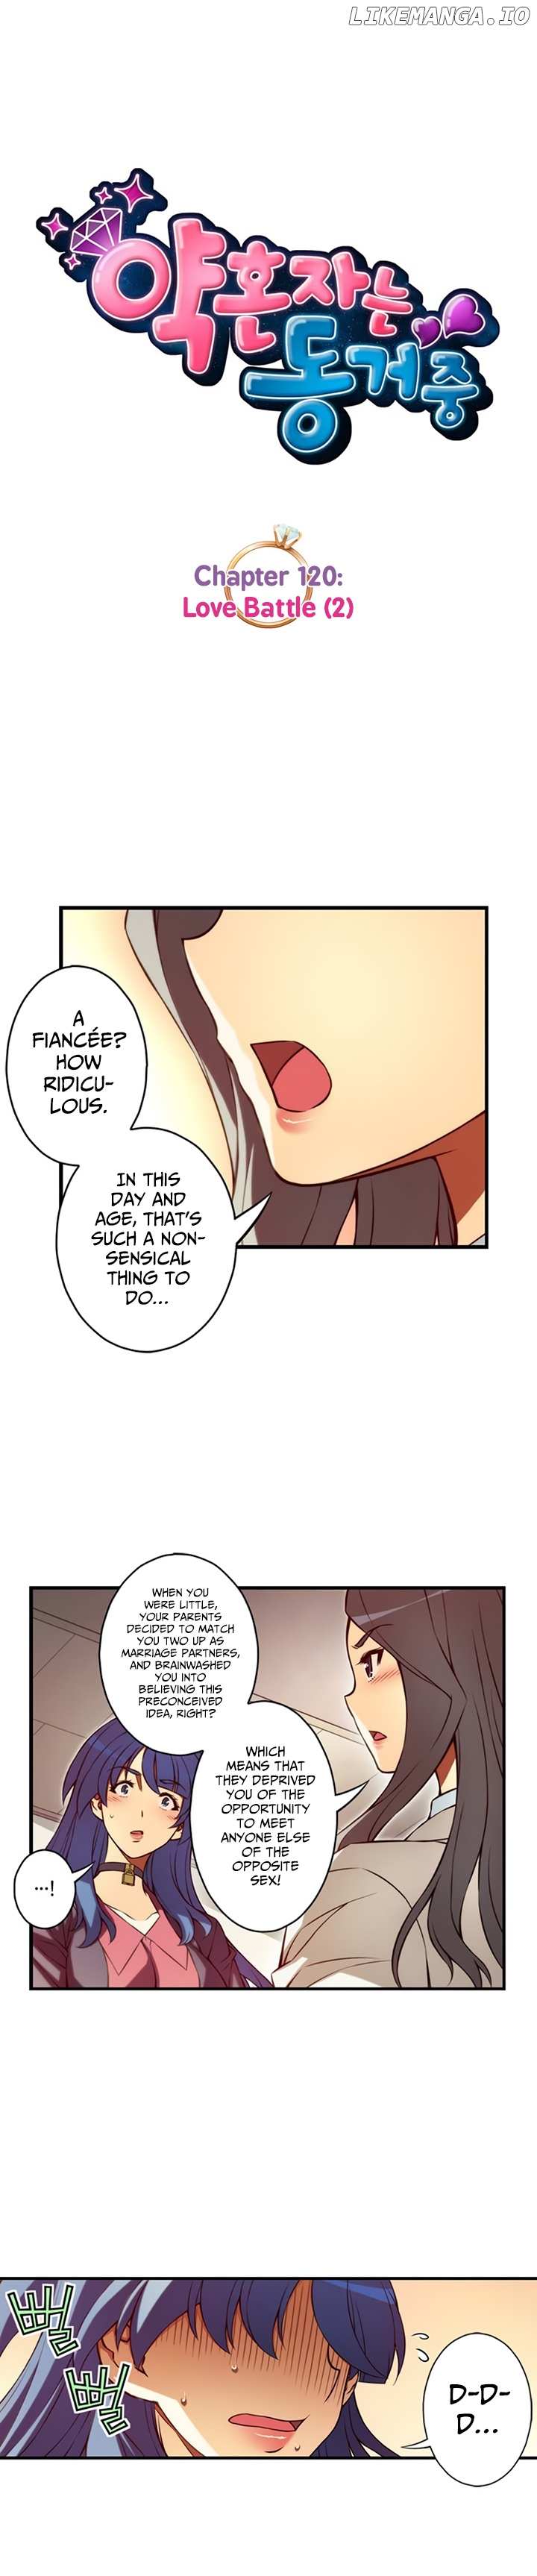 The Fiancees Live Together chapter 120 - page 3